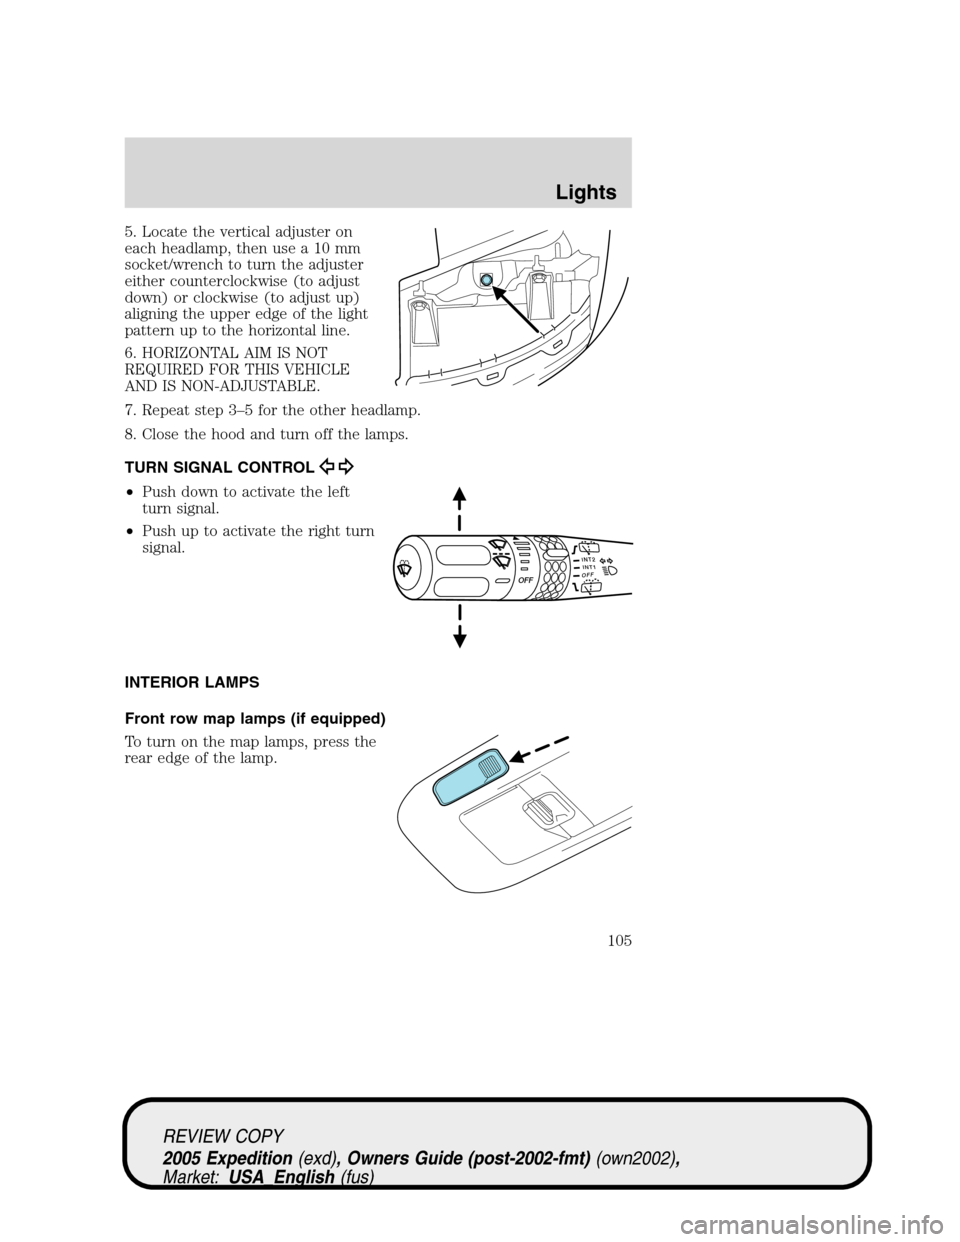 FORD EXPEDITION 2005 2.G Owners Manual 5. Locate the vertical adjuster on
each headlamp, then use a 10 mm
socket/wrench to turn the adjuster
either counterclockwise (to adjust
down) or clockwise (to adjust up)
aligning the upper edge of th